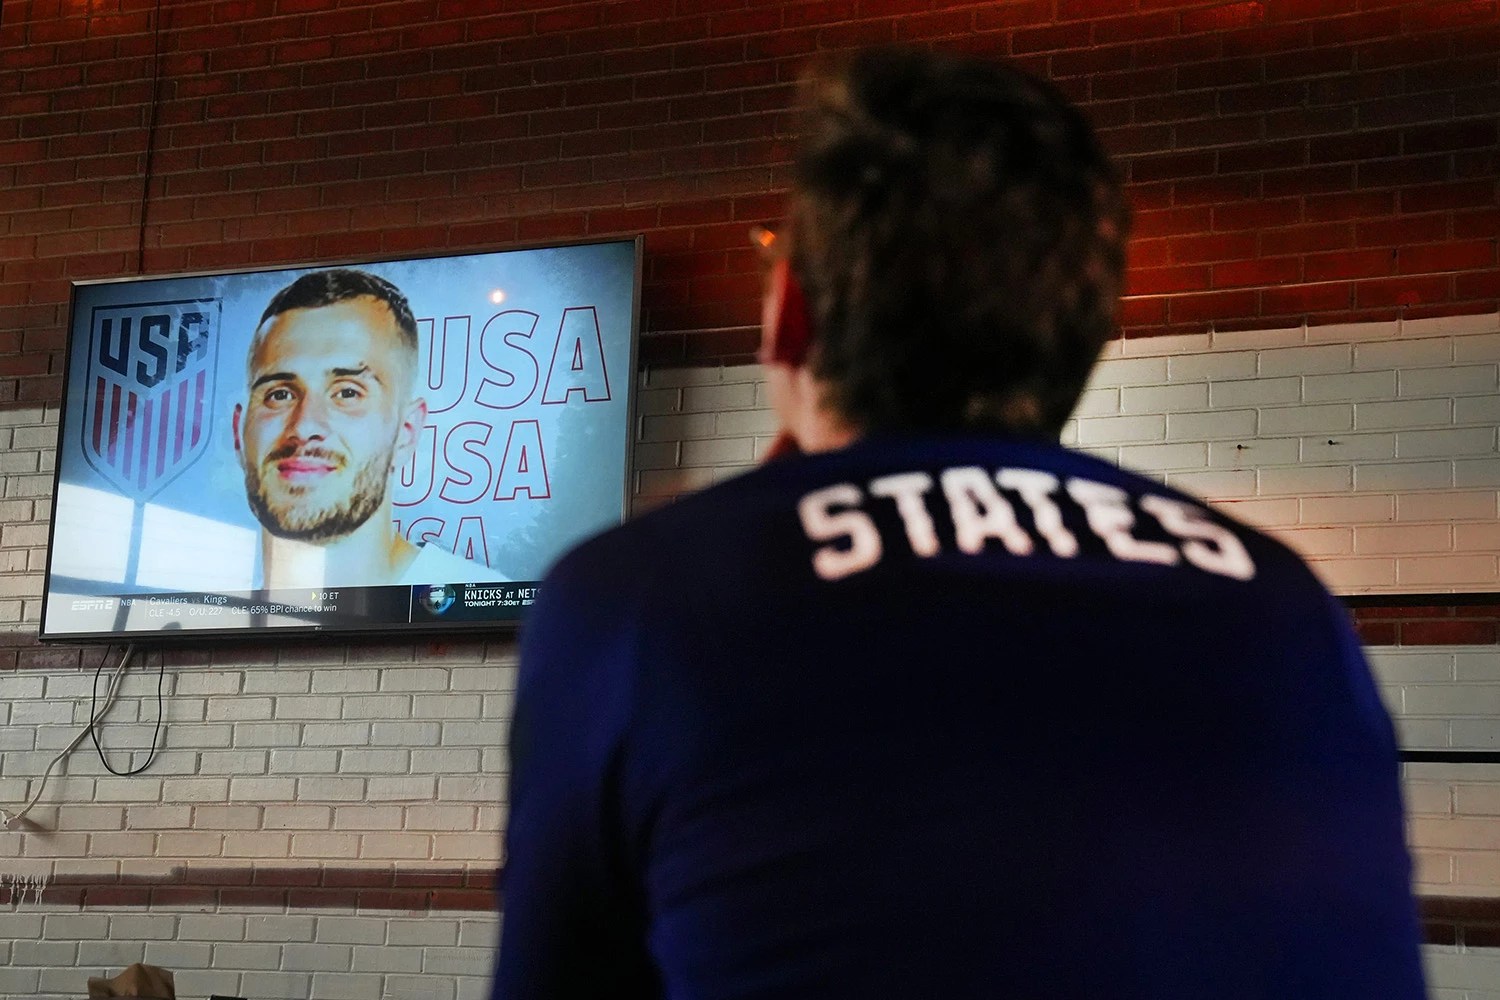 USMNT fan watches TV showing team roster